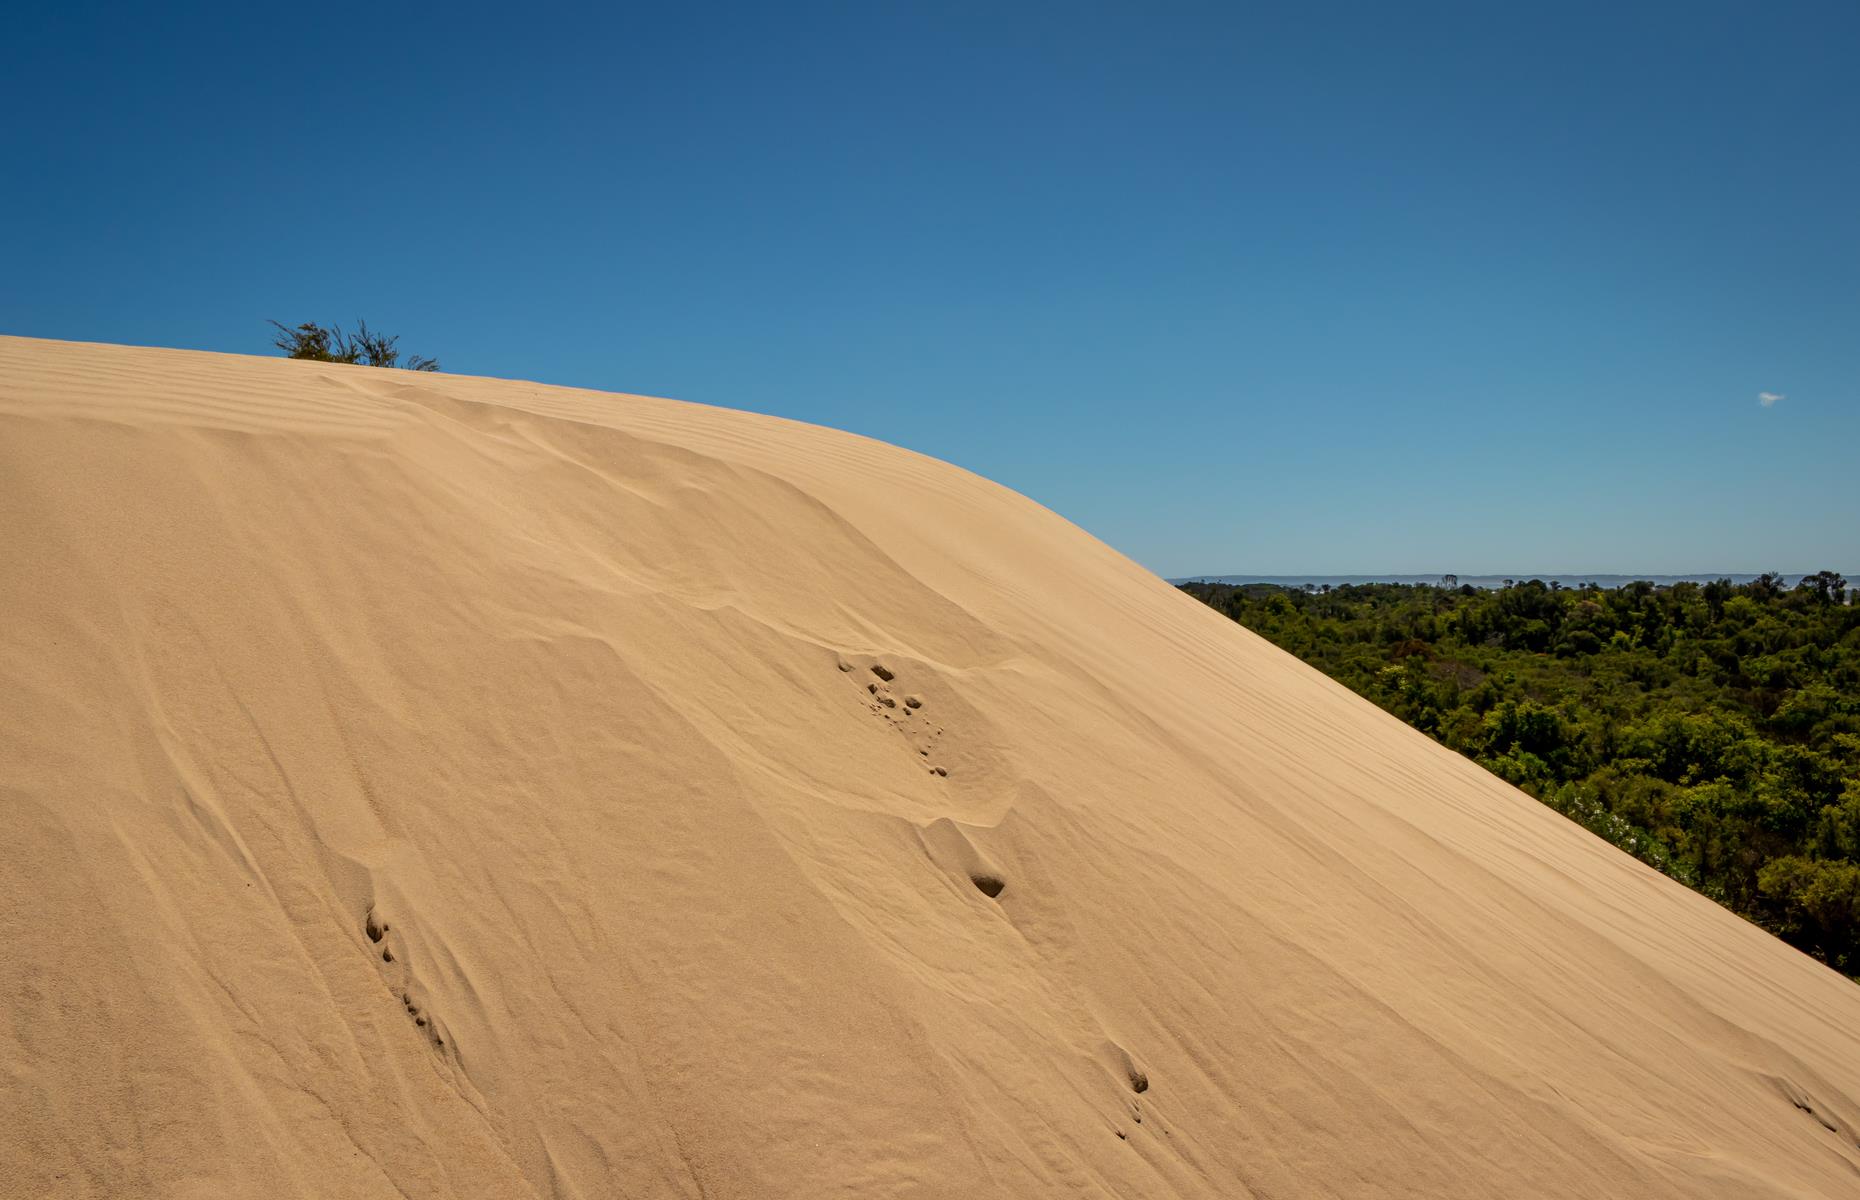 A soaring series of inland sand dunes known as the Big Drift can be found in the northern part of Wilsons Promontory National Park, which sits to the southeast of Melbourne. While most visitors head south to the park’s beaches, instead follow the Big Drift Track from Stockyards Camp – just by the park entrance – to scale this surreal and solitary landscape. The undulating dunes are best enjoyed at sunrise or sunset, when the sands glow a rose-tinged gold.